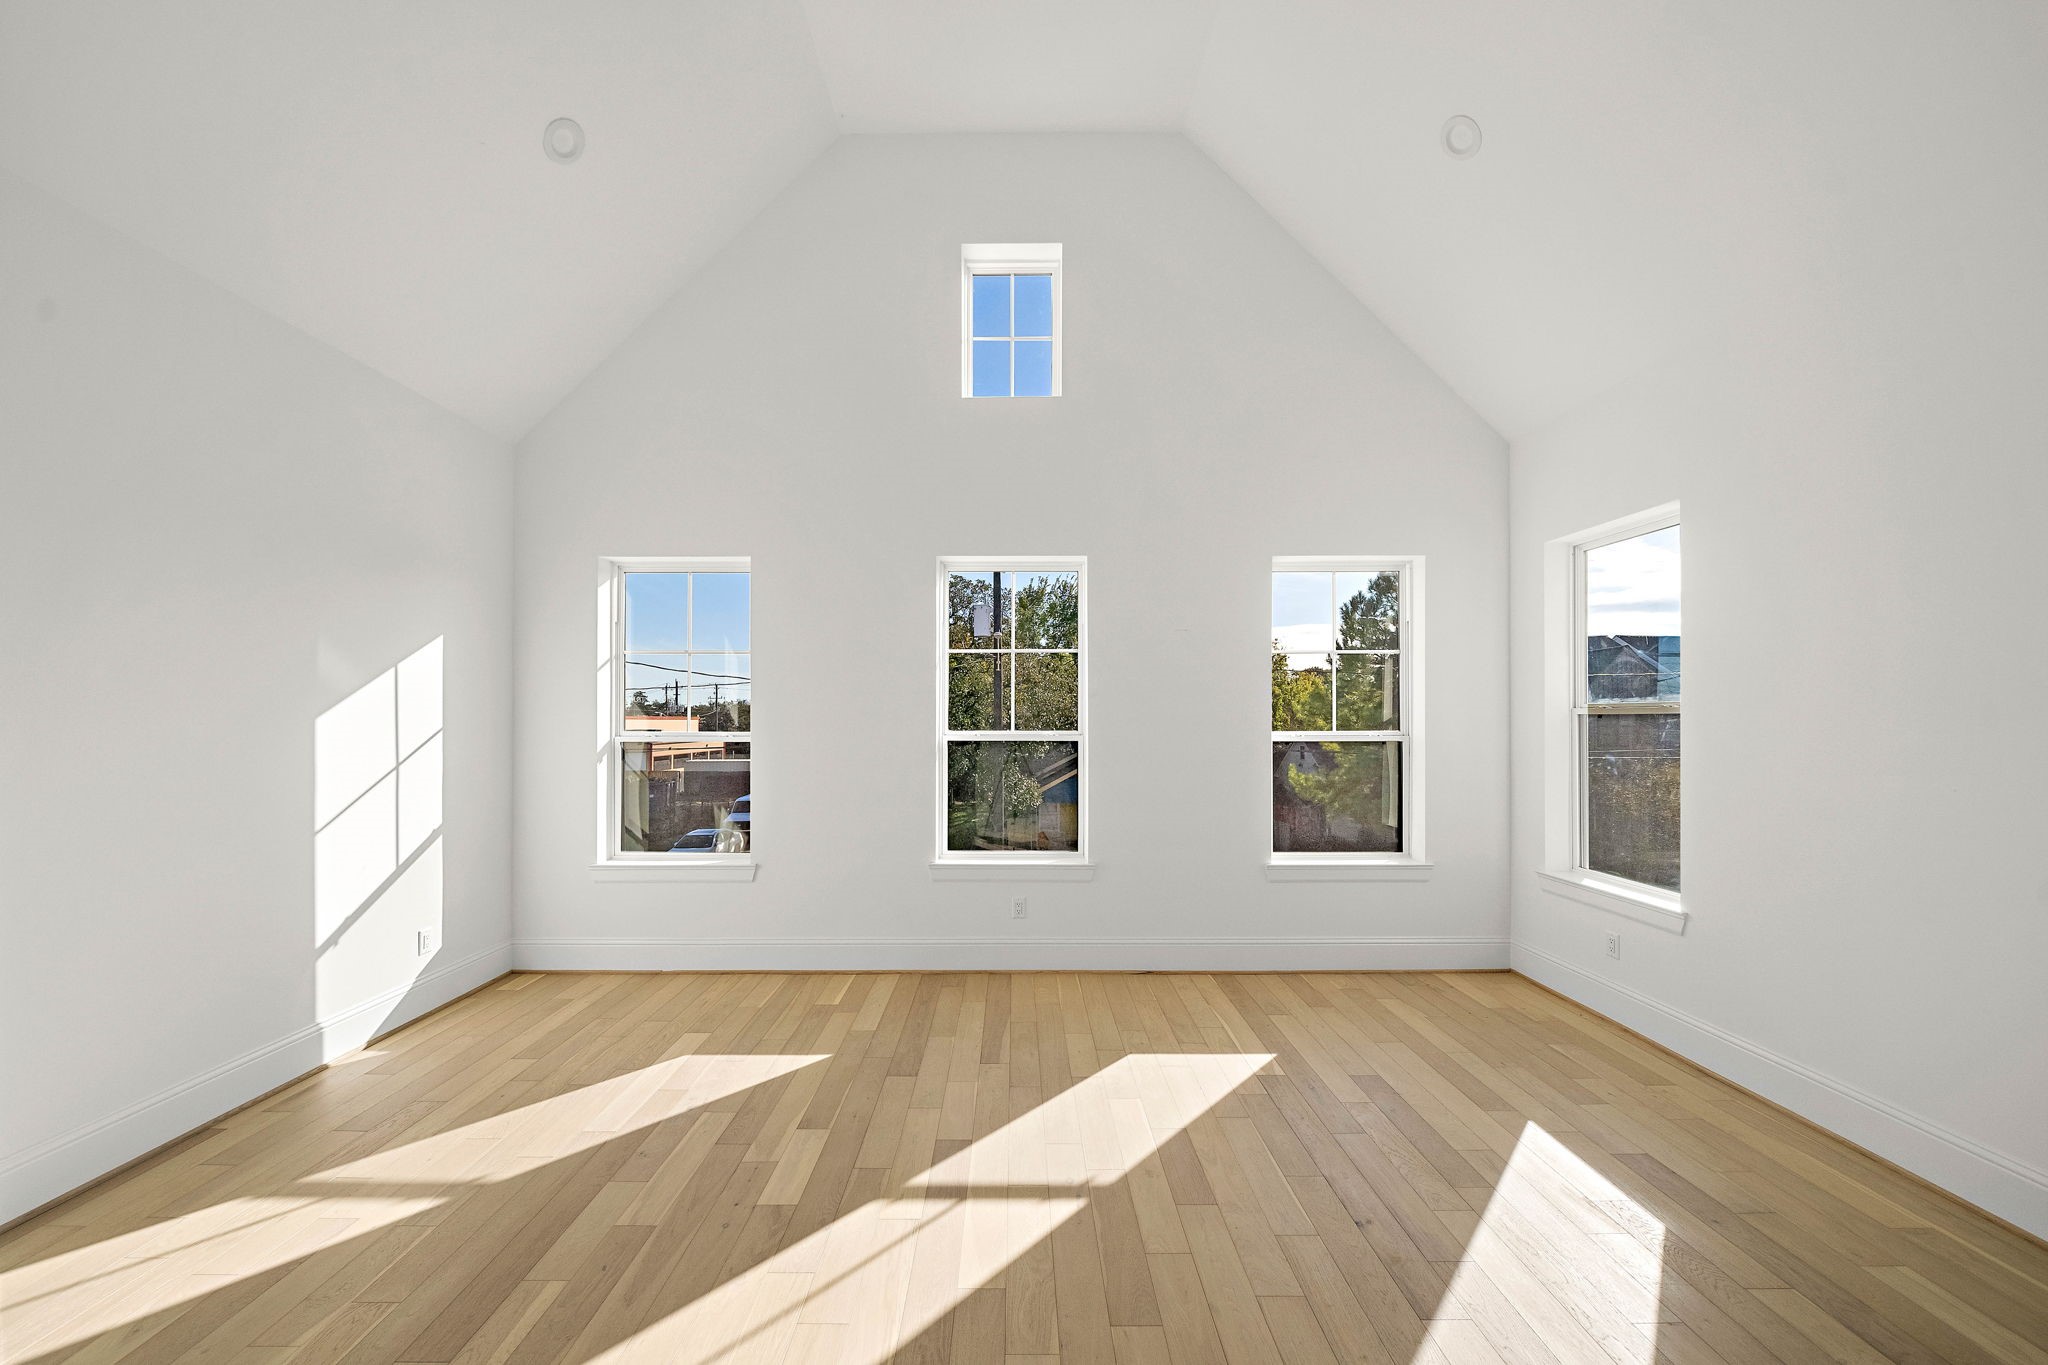 Generously-sized master suite with an abundance of windows, vaulted ceiling, and beautiful wide plank wood flooring. (Photo is of a completed home, finishes are subject to change.)